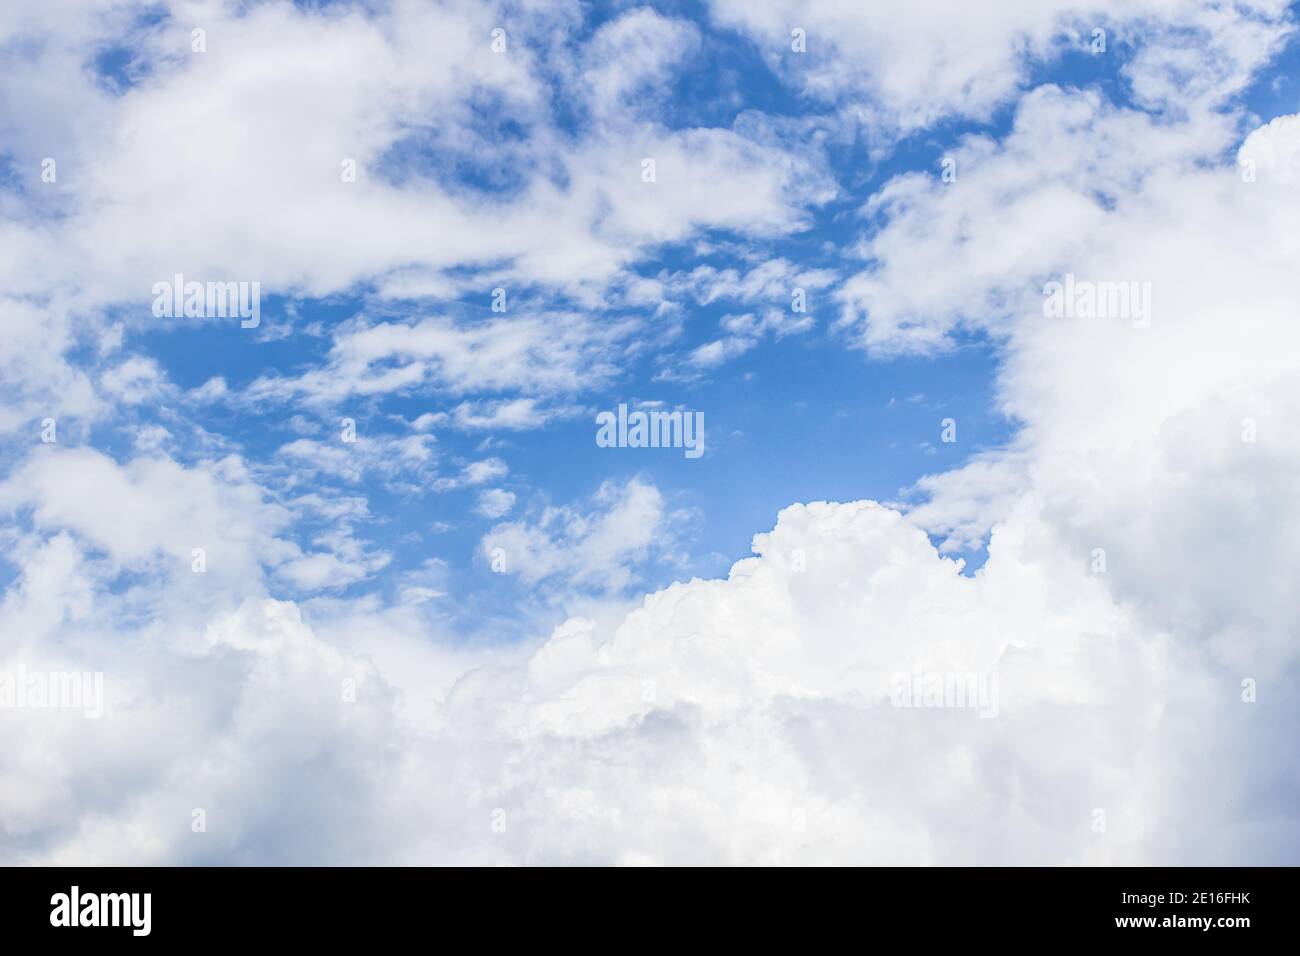 Blue sky background with white fluffy clouds framing copy space. Stock Photo